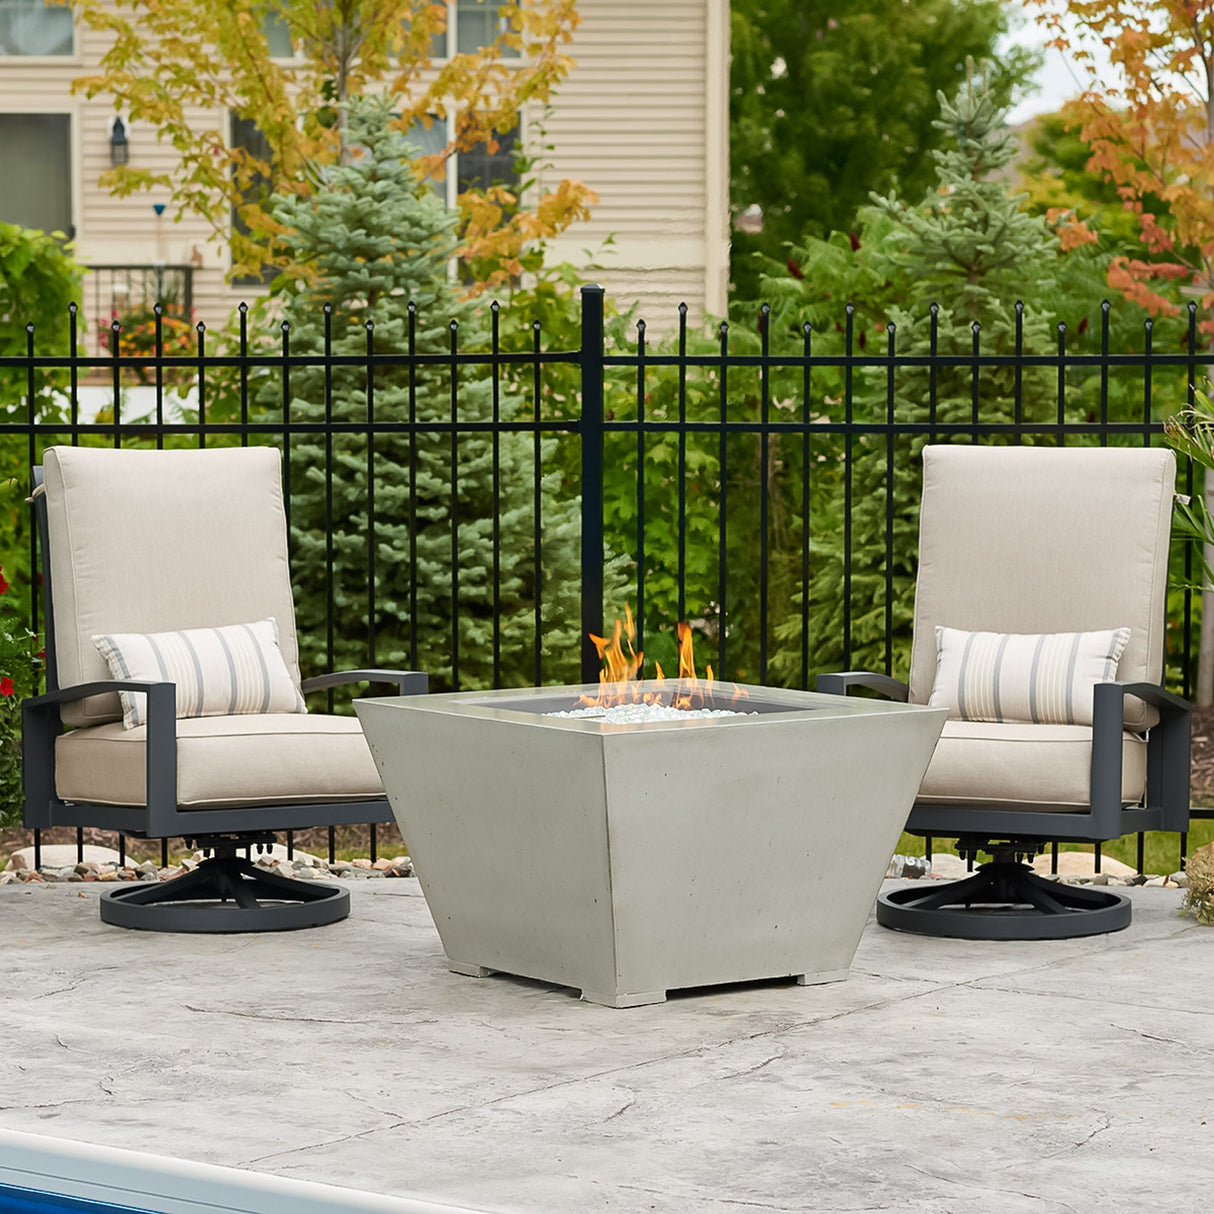 The Cove Square Gas Fire Pit Bowl standing next to patio furniture in an outdoor space